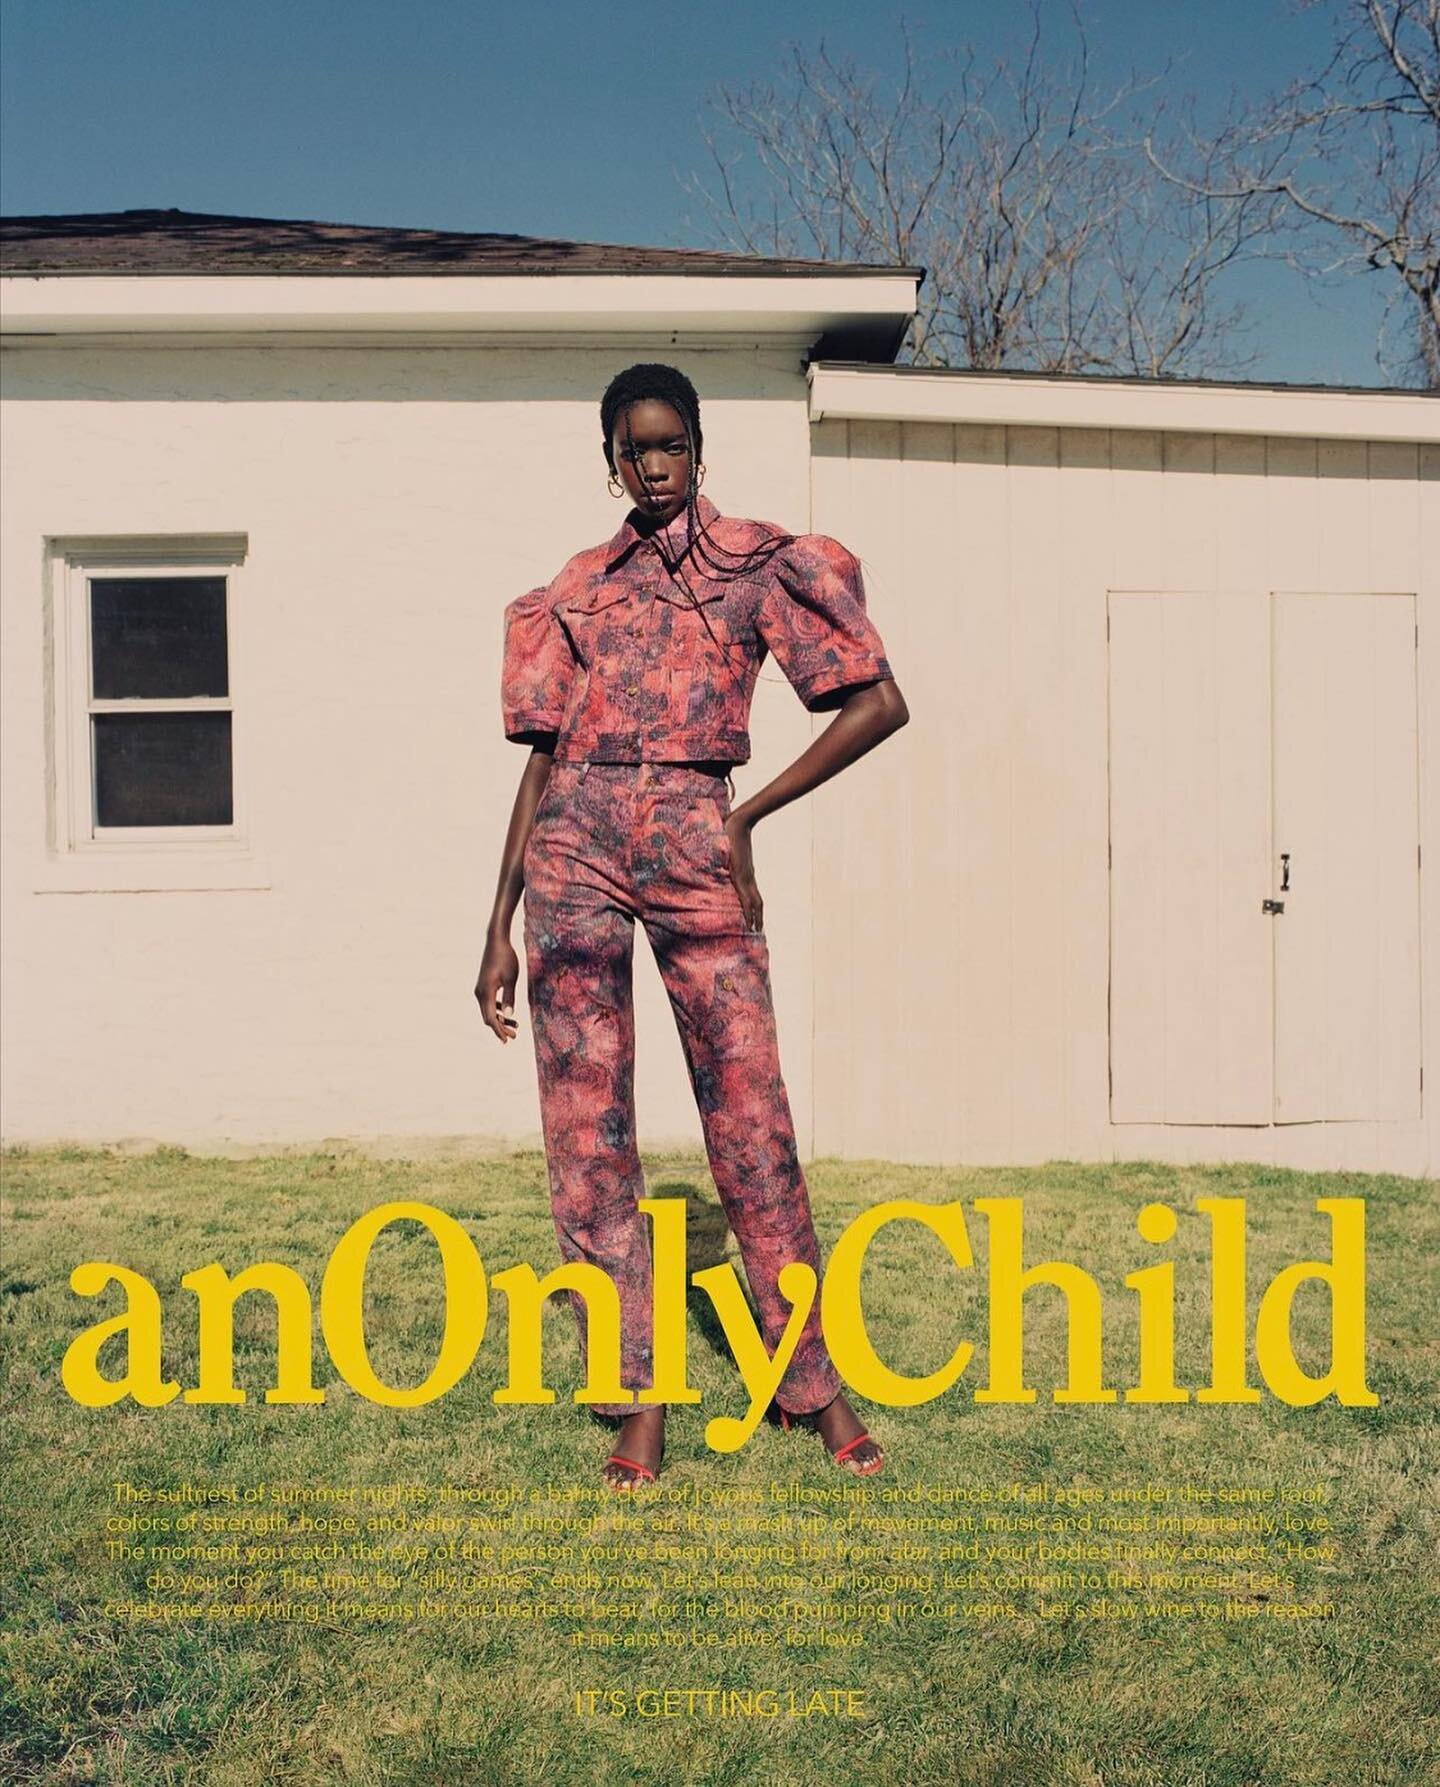 @anonlychild SS23 &quot;It's Getting Late&quot; by @maxwellosborne 

One of the most talented designers and teams I have had the pleasure of working with. Every inch of this collection is designed exquisitely from the textiles to the garments &amp; s